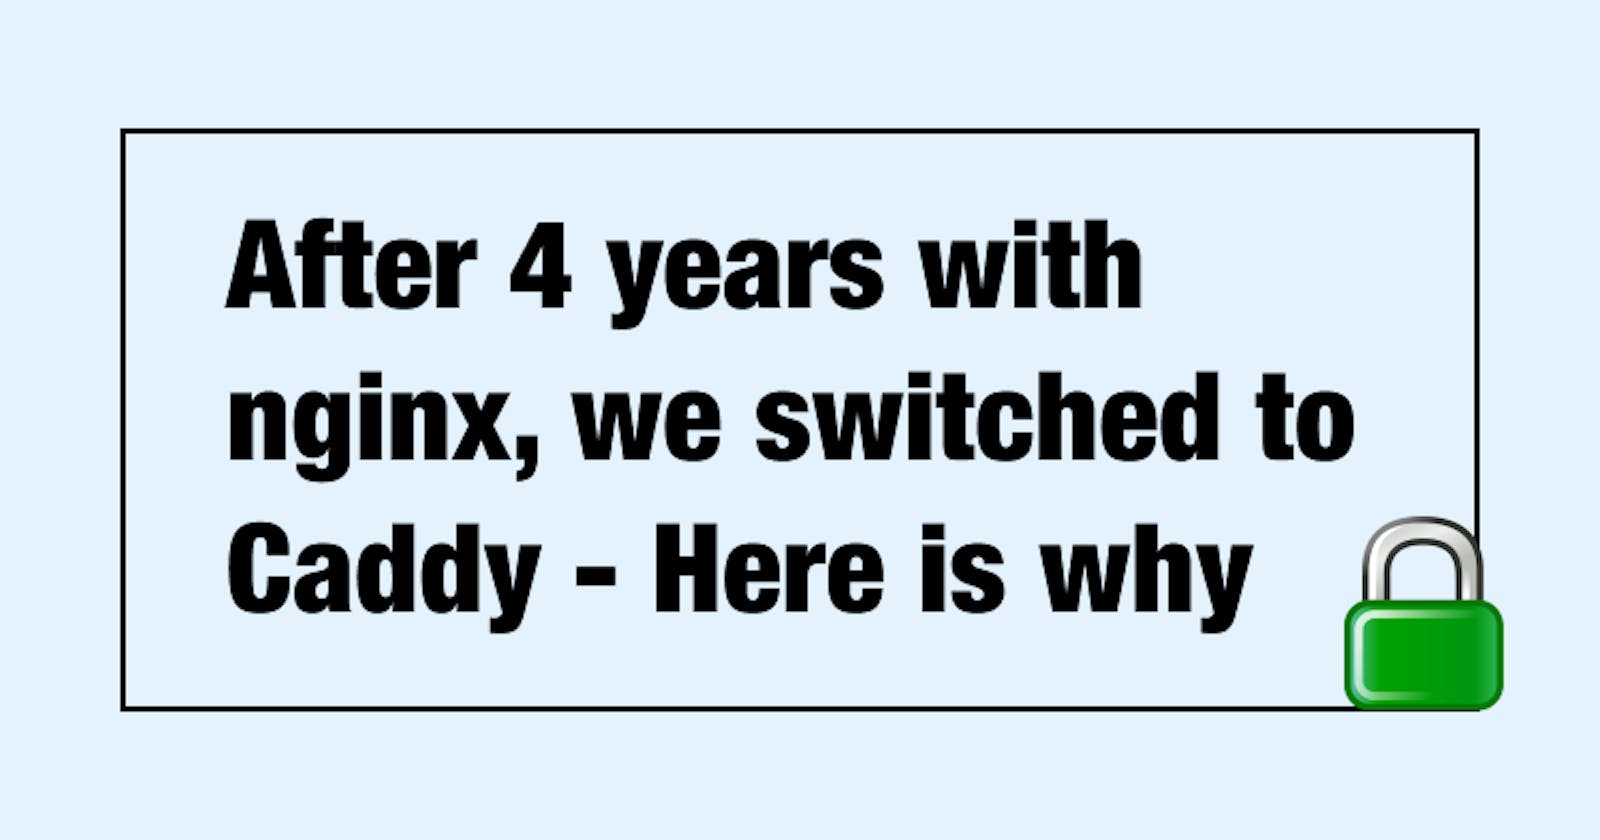 After 4 years with nginx, we switched to Caddy - Here is why